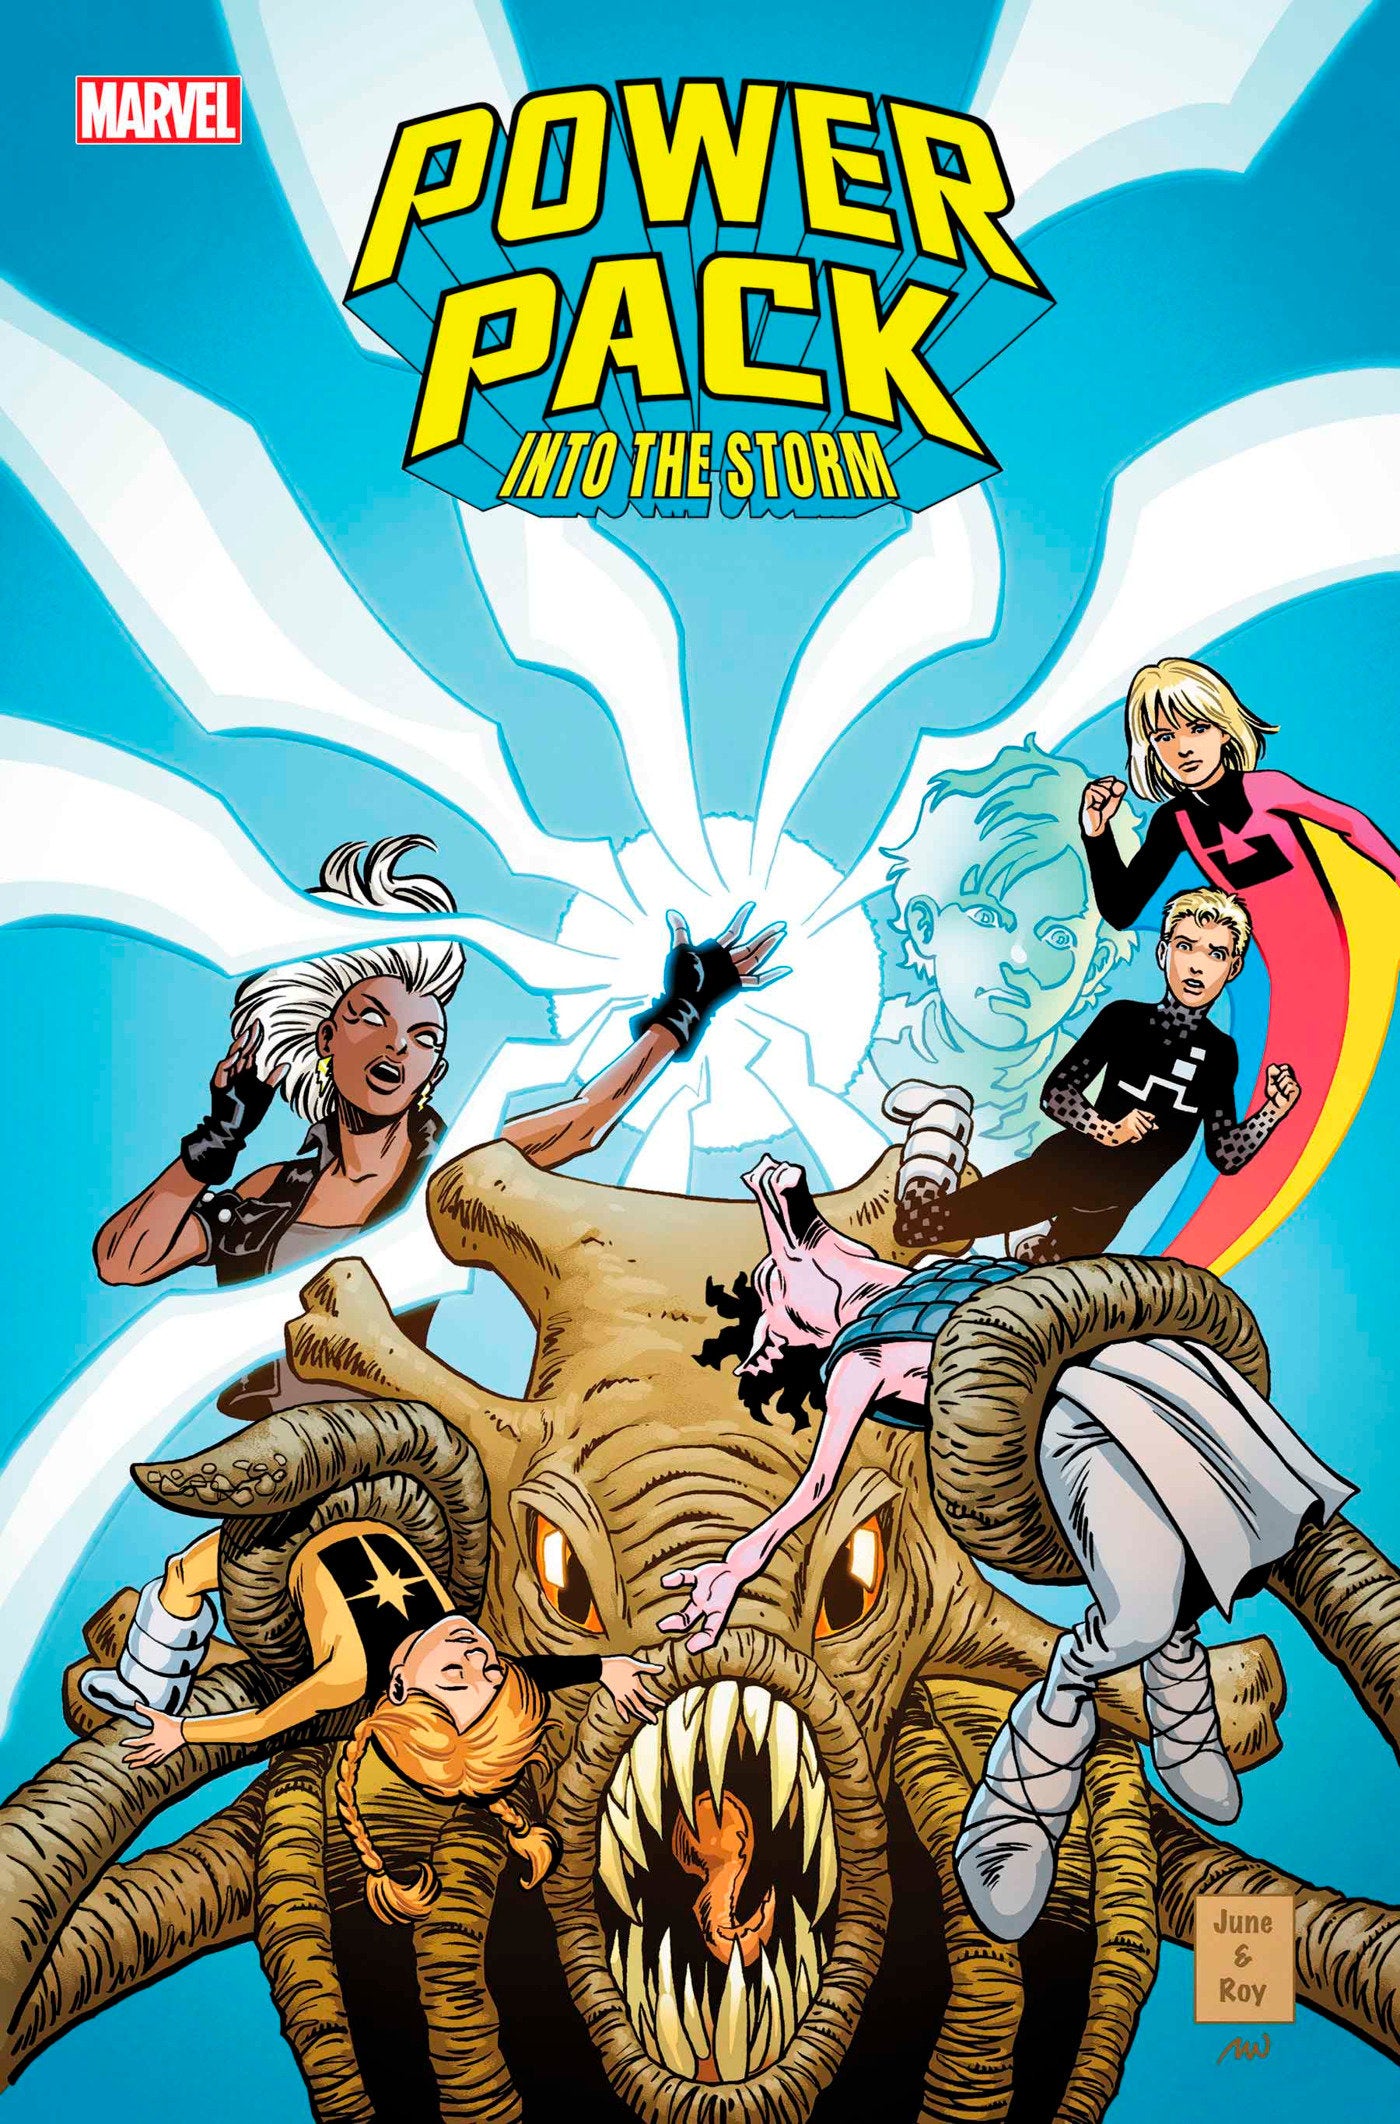 Power Pack Into The Storm #3